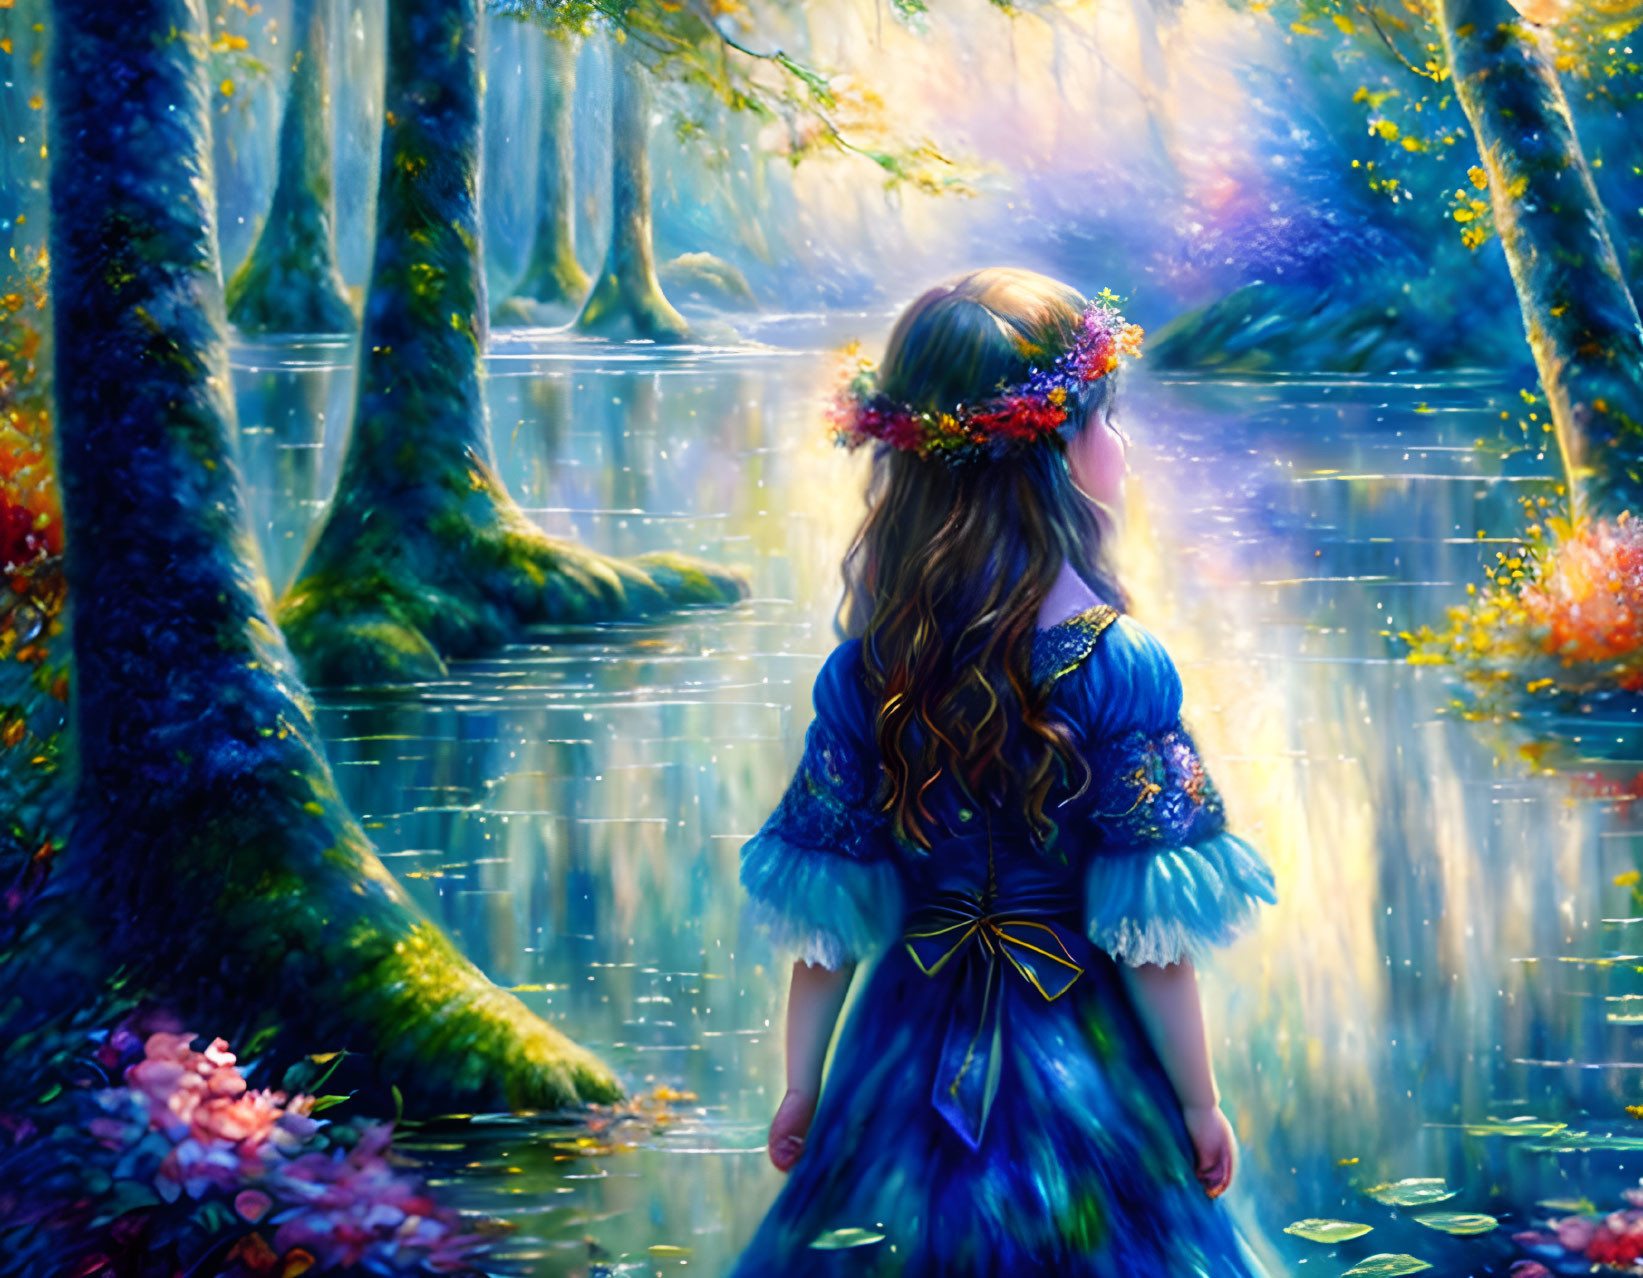 A Girl Standing In A Mysterious Forest